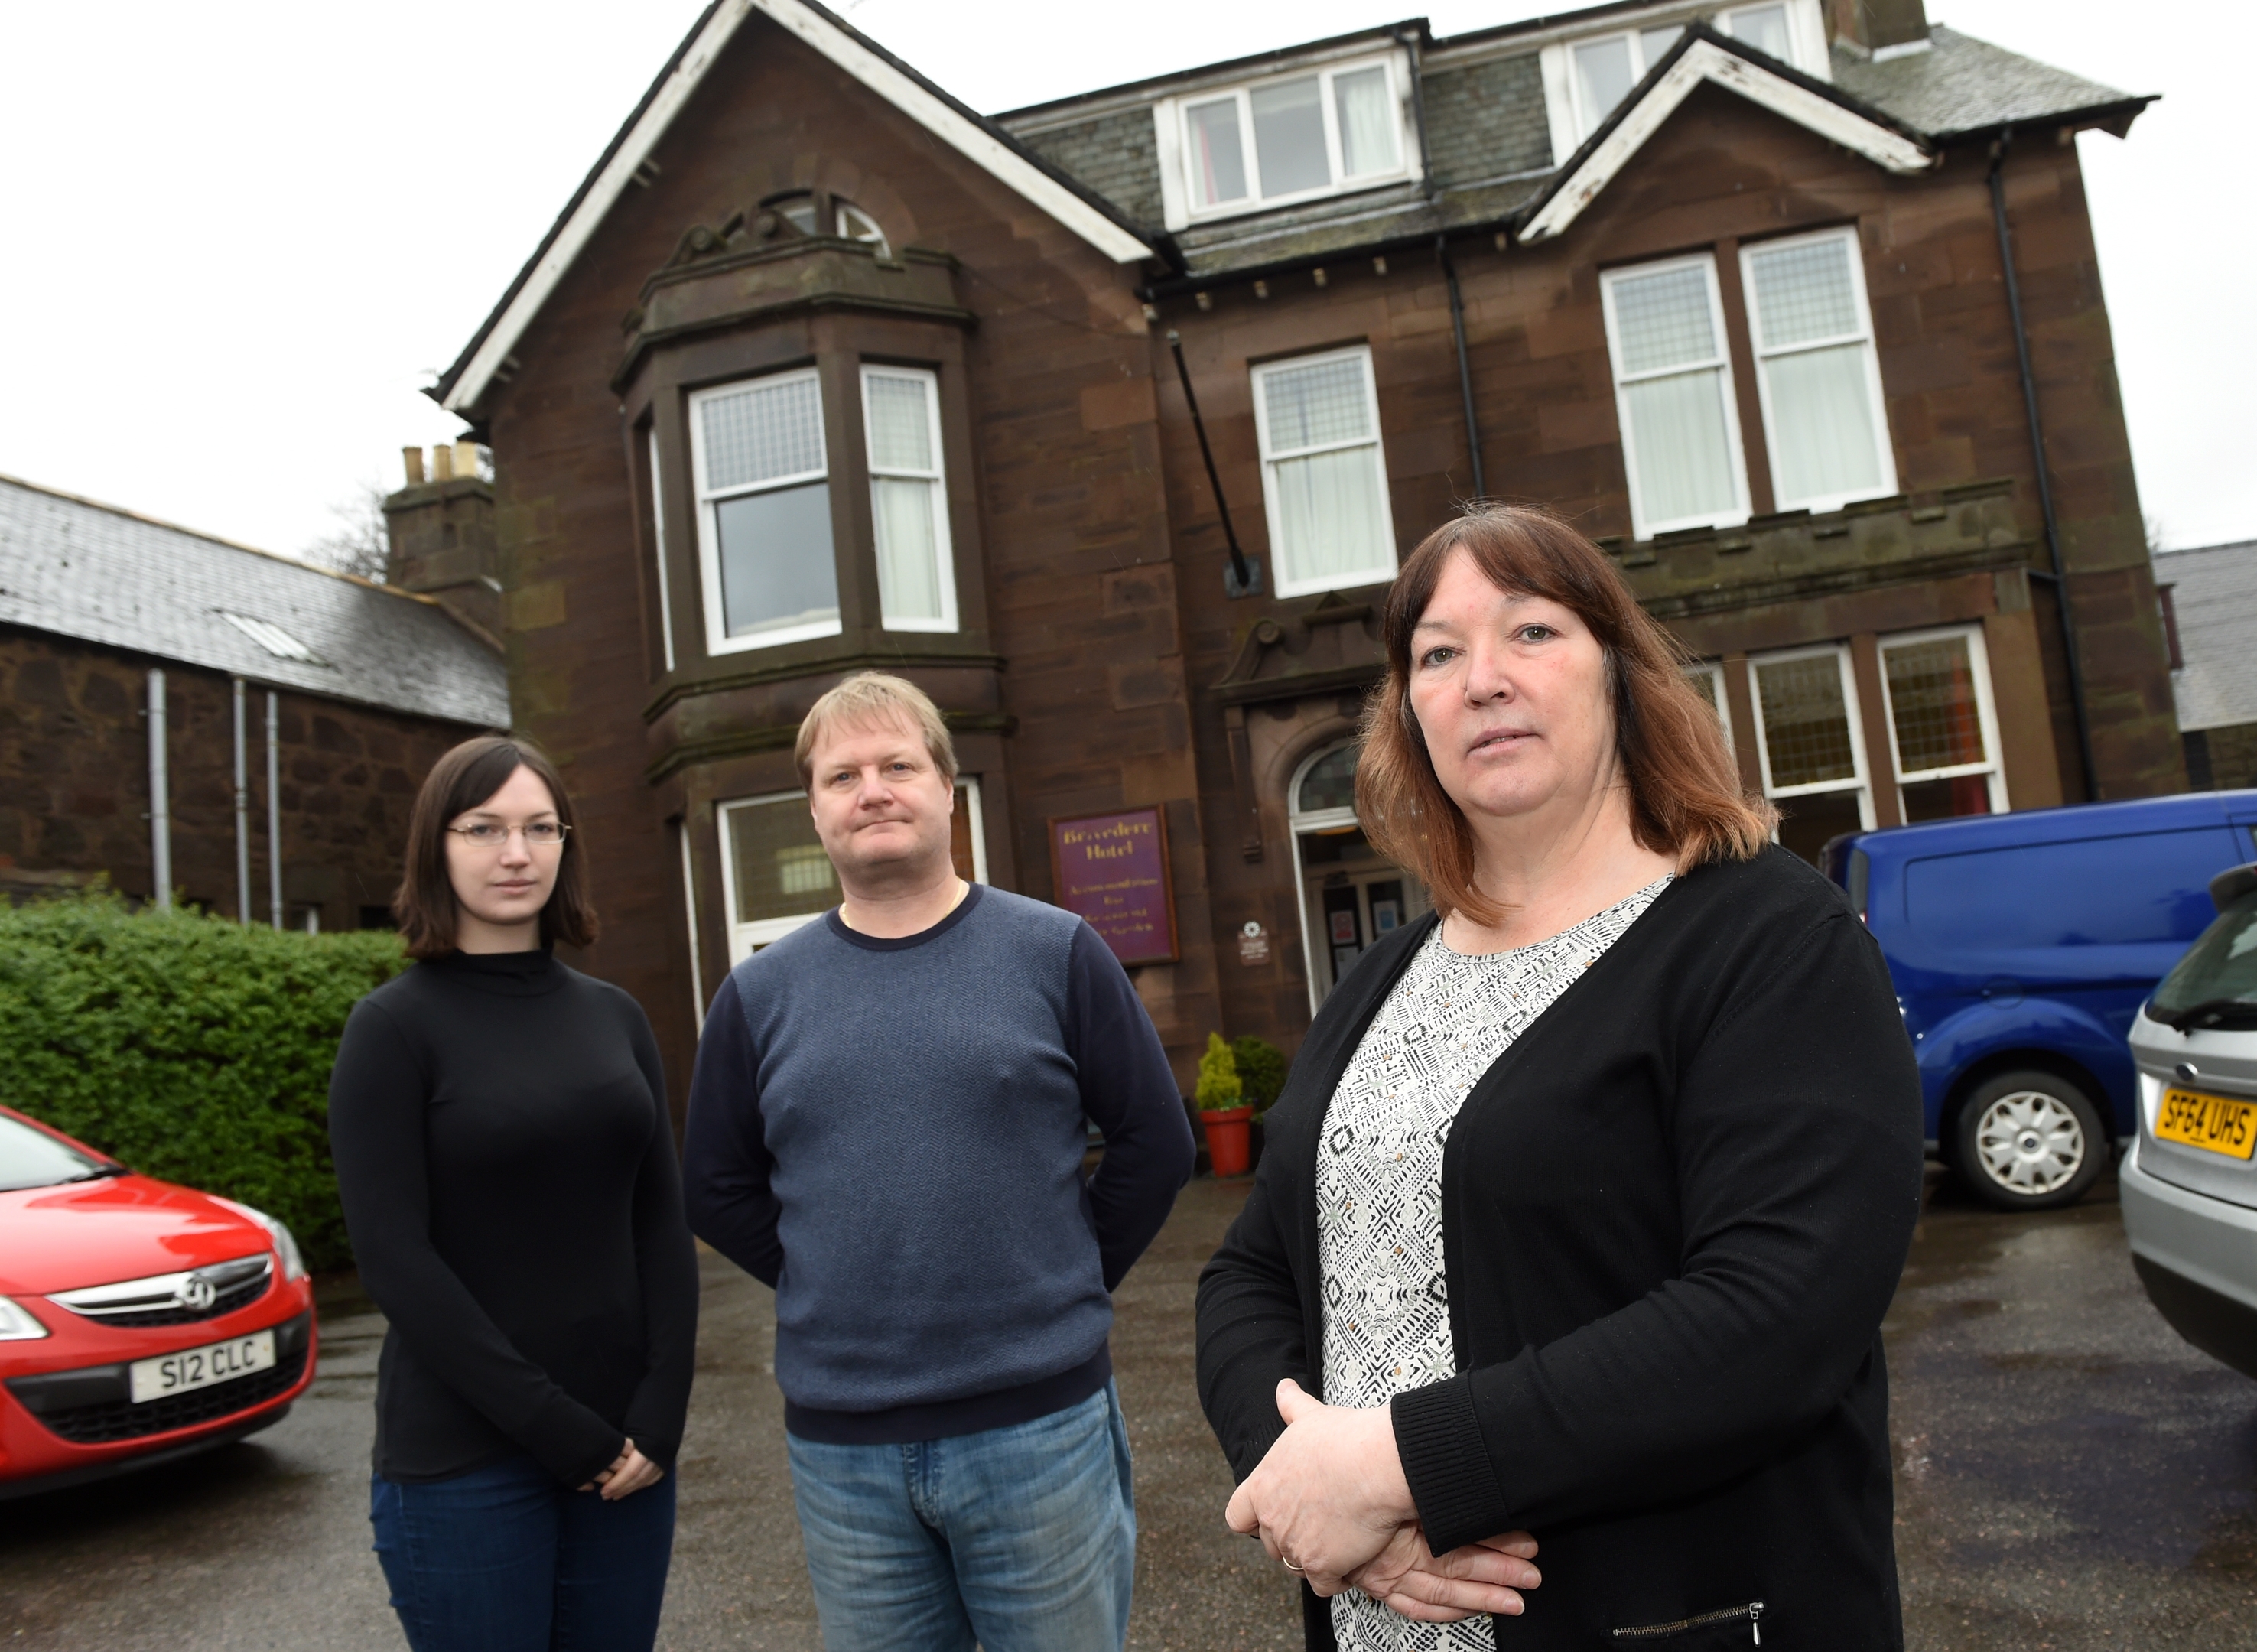 Owners of the Belvedere Hotel in Stonehaven, Sheila and Mick Howarth with their daughter Nikki,